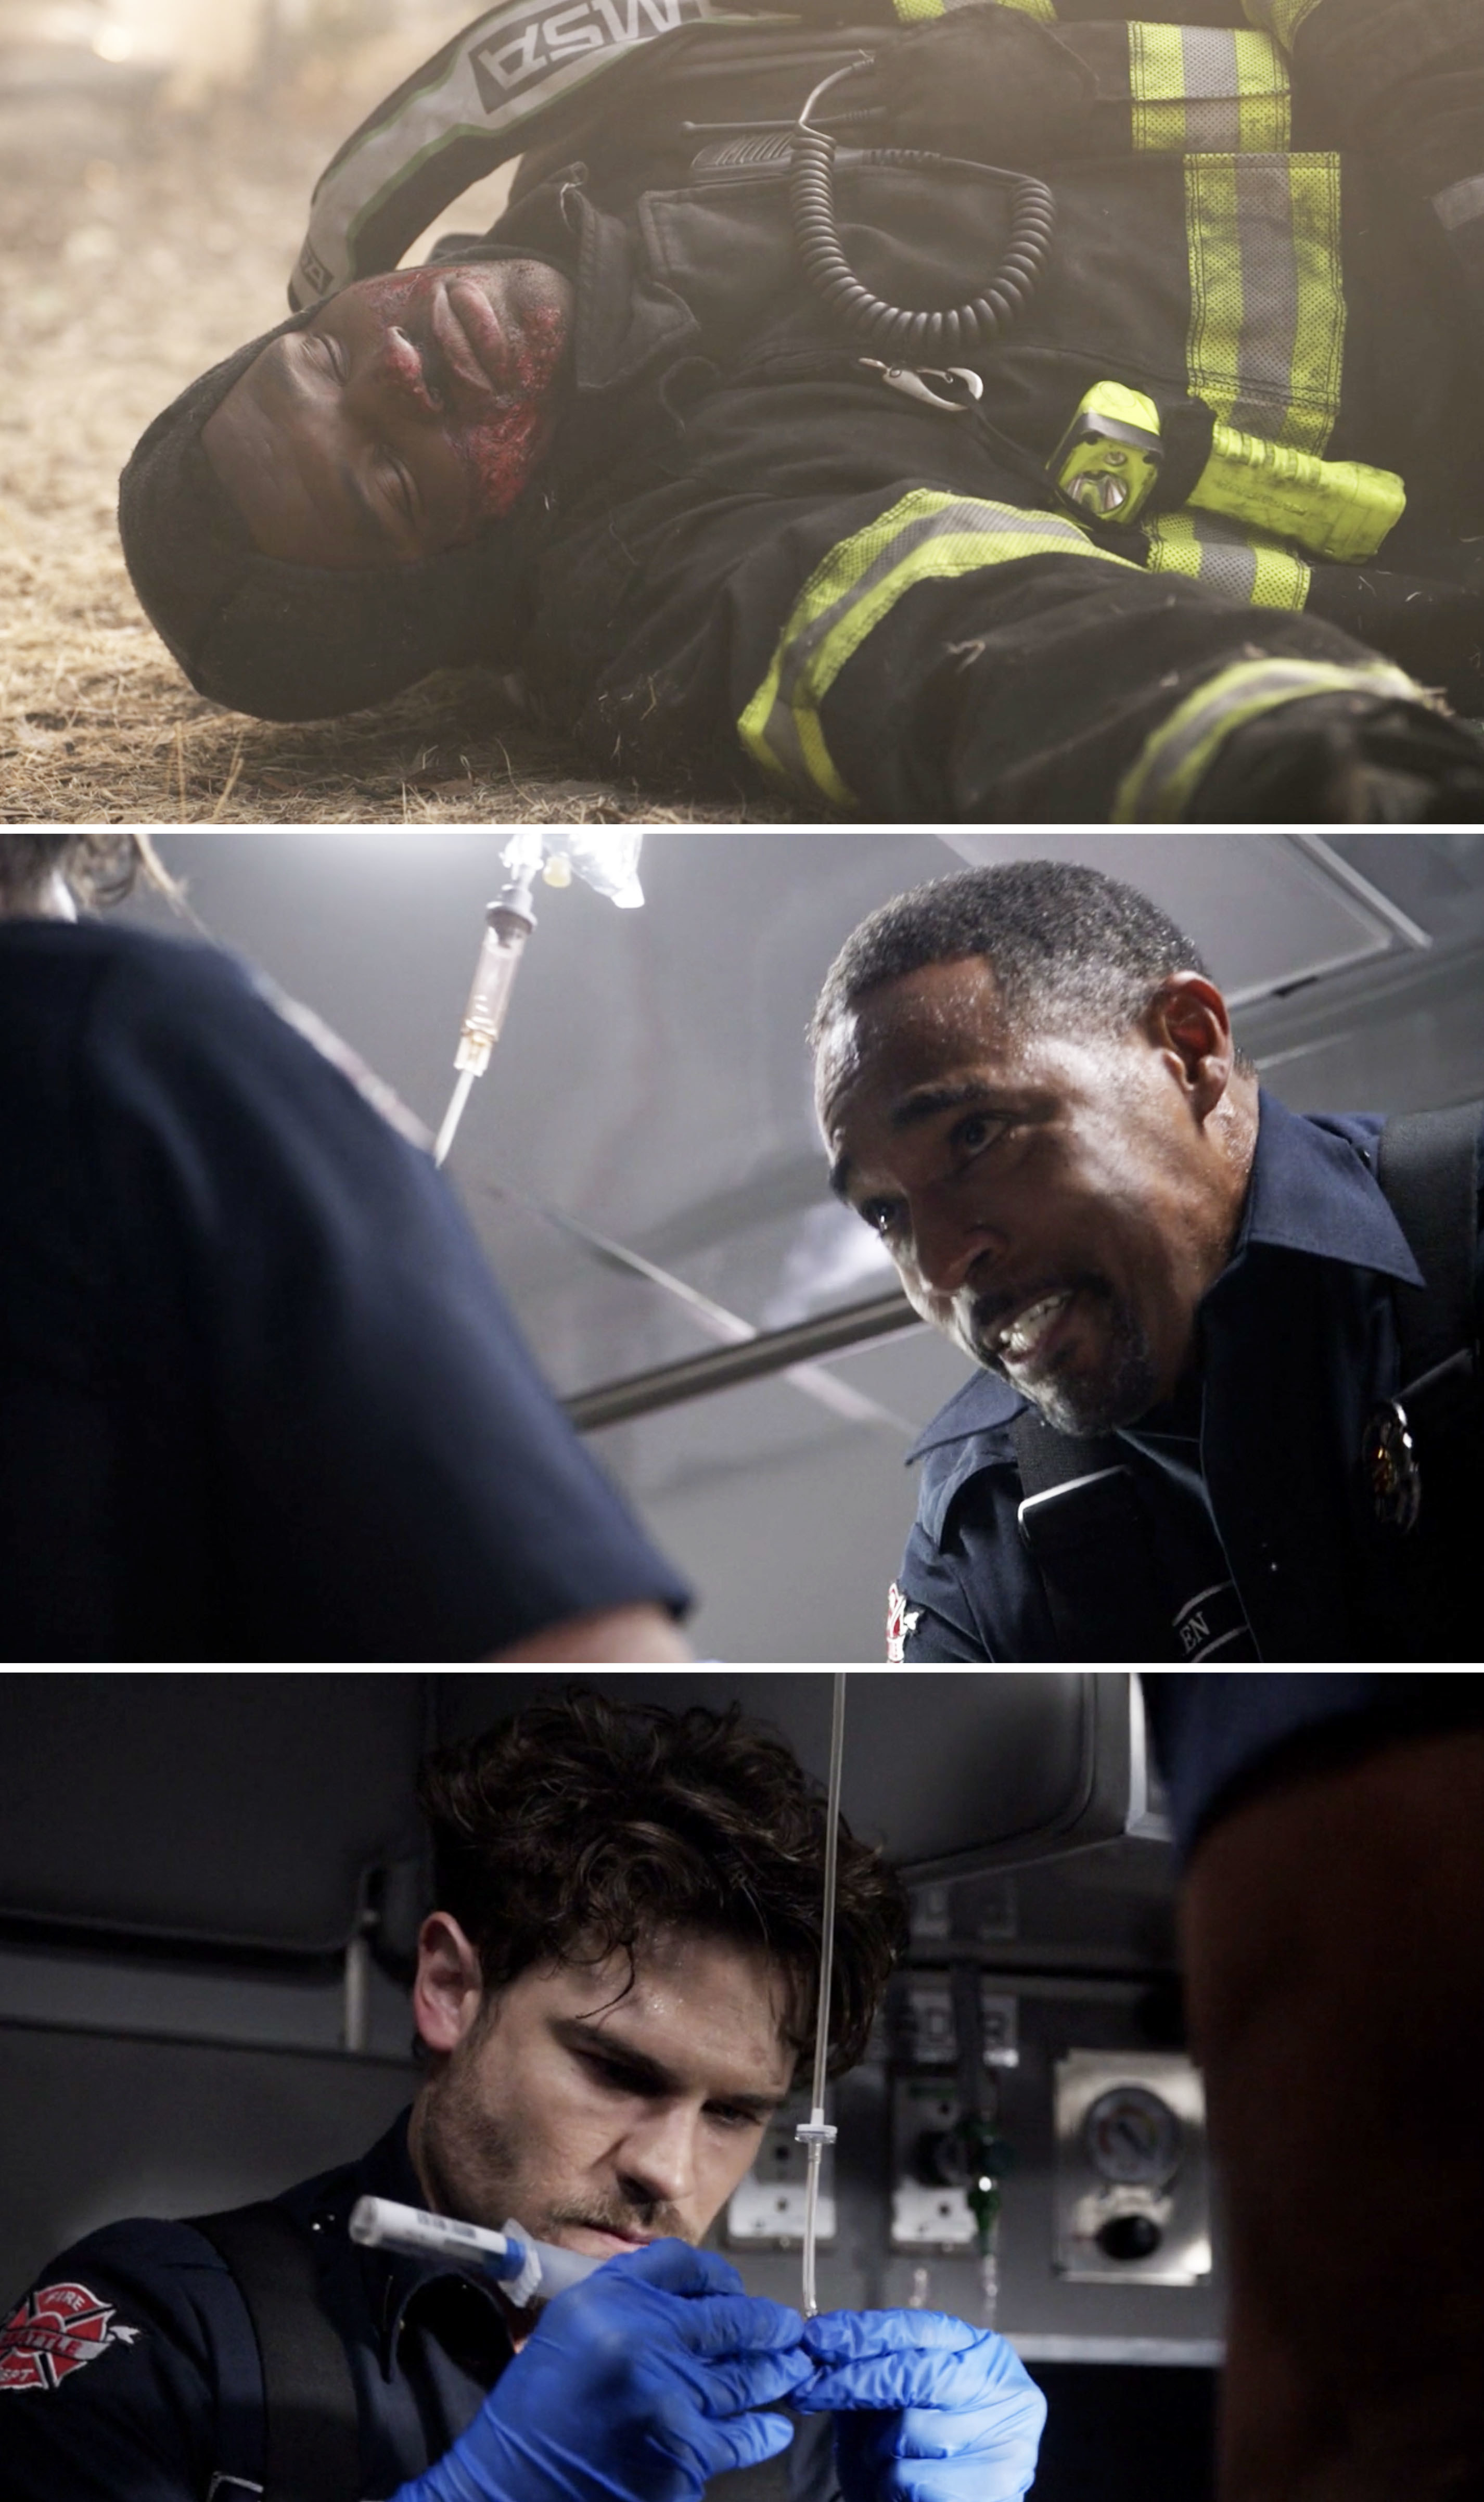 Miller lying on the ground and Ben crying while giving him CPR in an ambulance